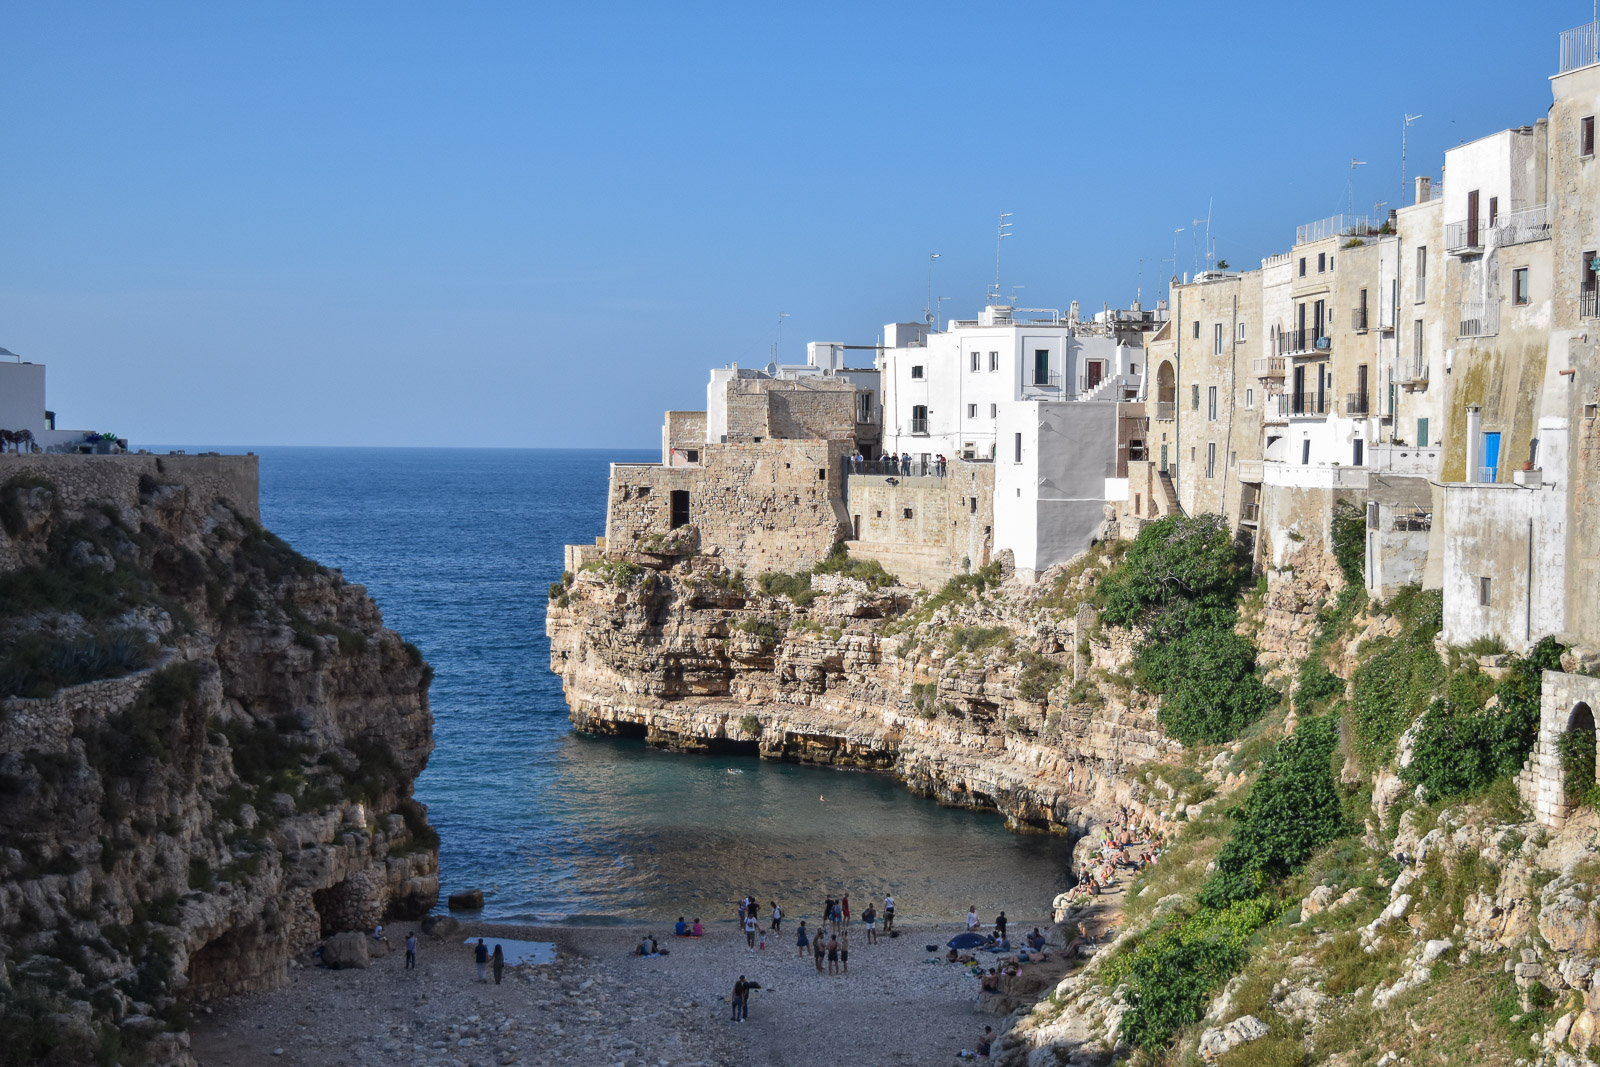 White houses on the cliff side overlooking the beach at polignano a Mare